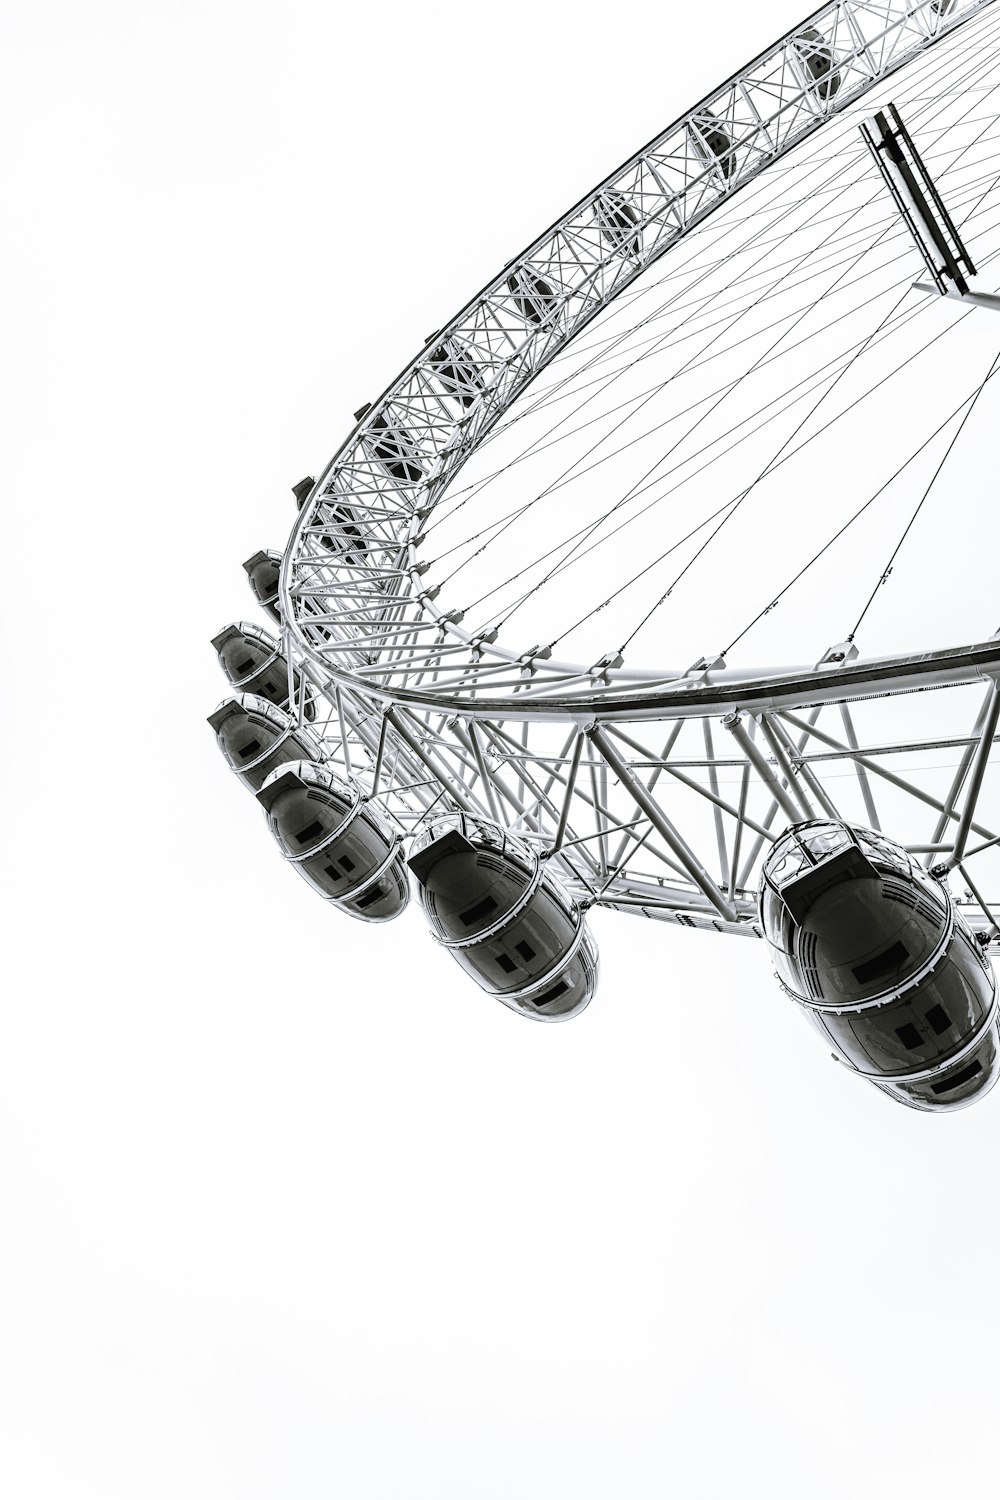 a ferris wheel is shown in black and white